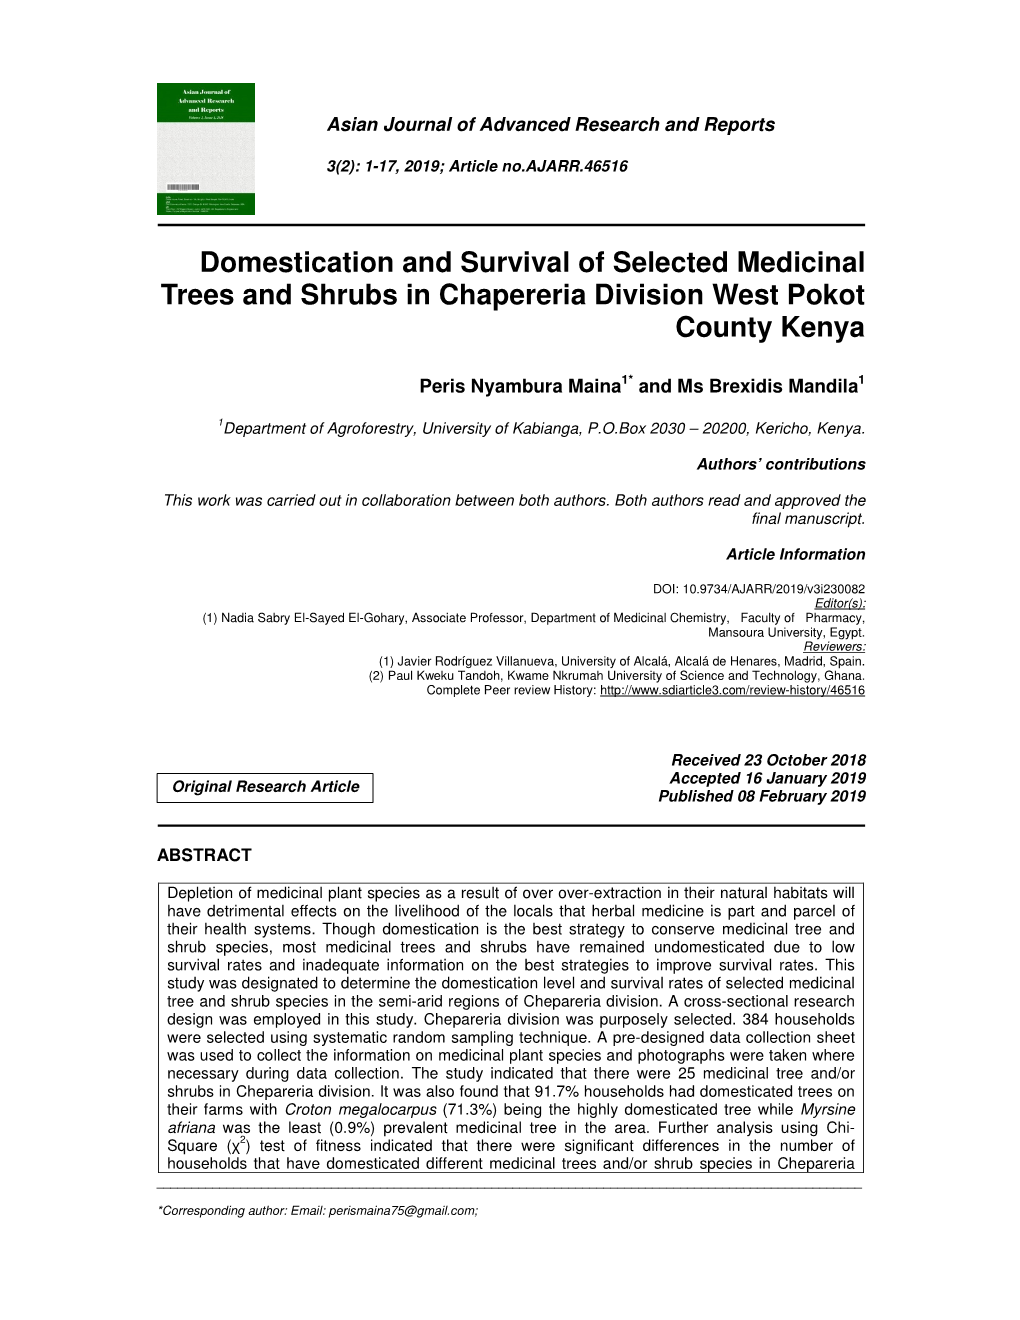 Domestication and Survival of Selected Medicinal Trees and Shrubs in Chapereria Division West Pokot County Kenya